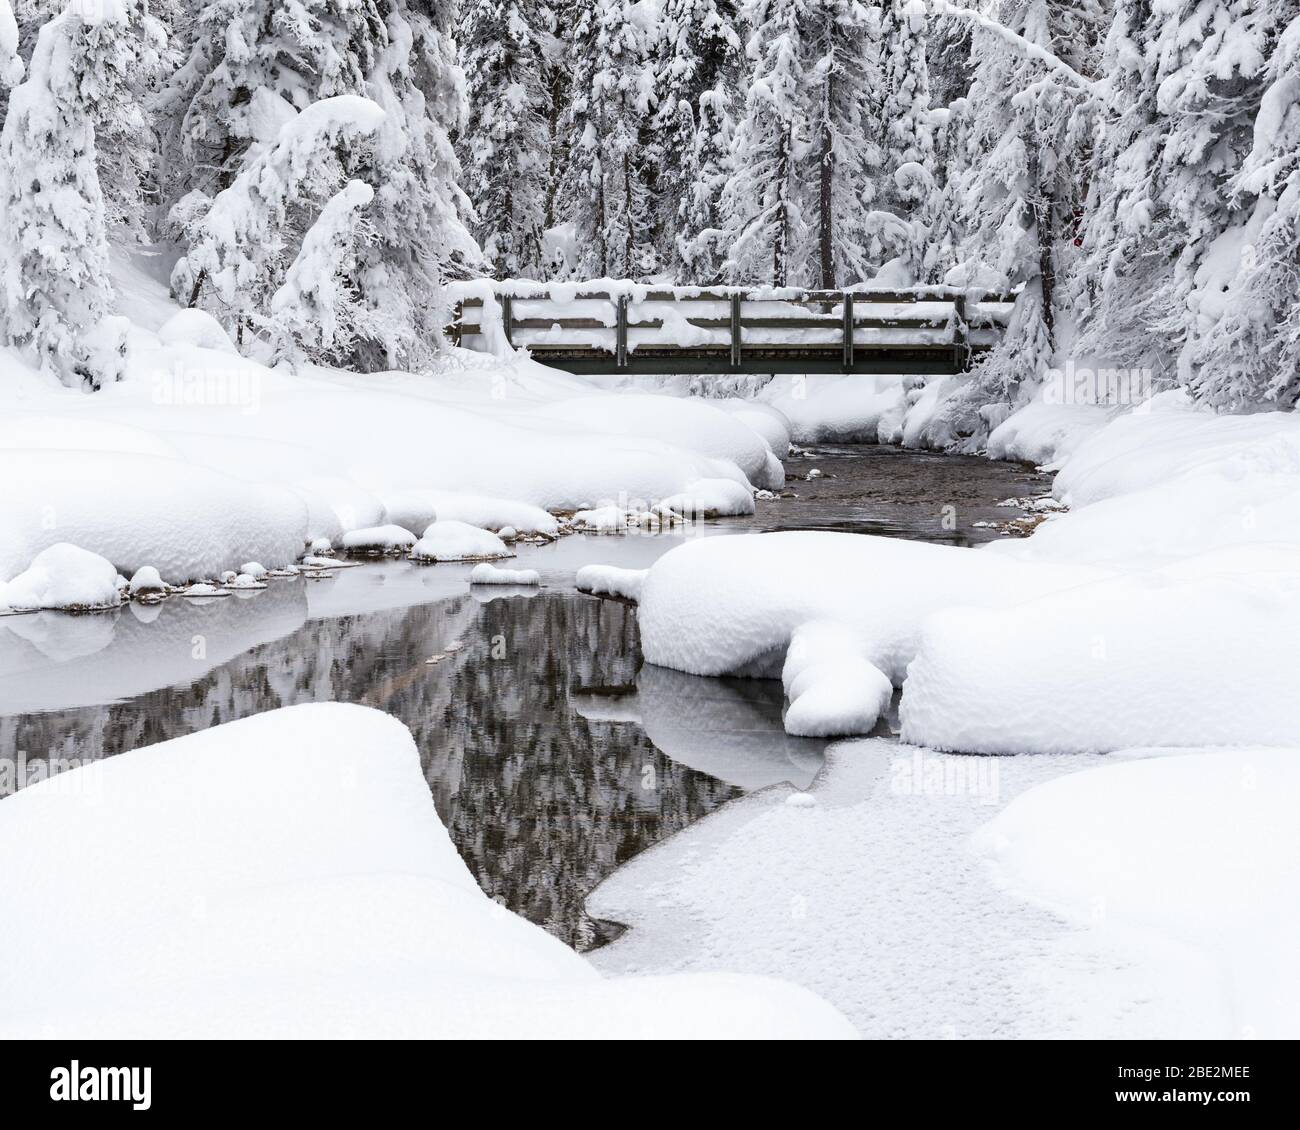 Wooden foot bridge over a stream running into Emerald lake during winter, Yoho National Park, Canadian Rockies, British Columbia, Canada Stock Photo